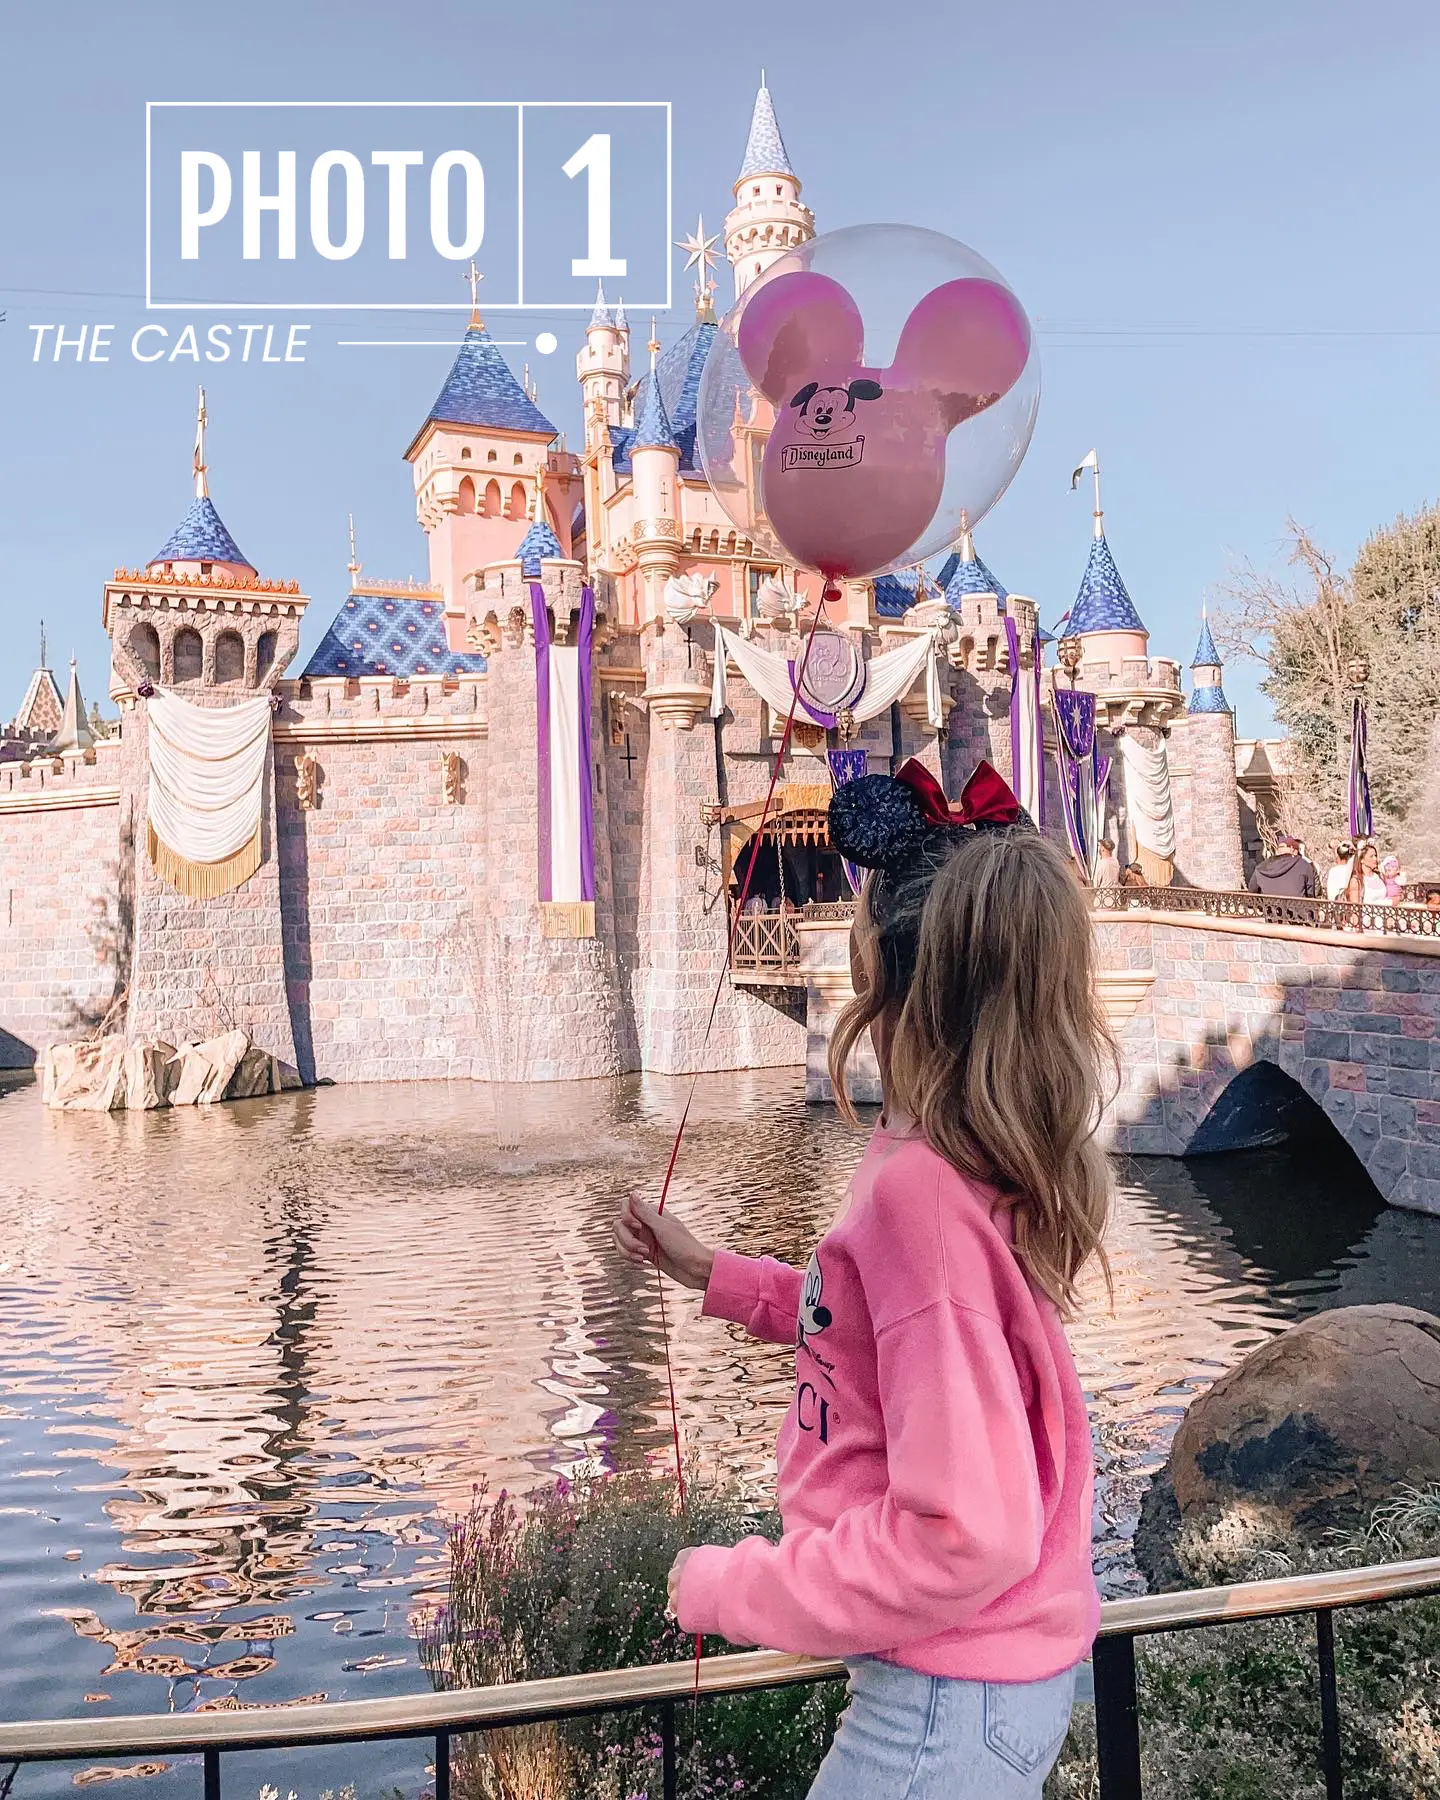  A little girl in a pink shirt is standing in front of a castle. She is holding a balloon and looking up.